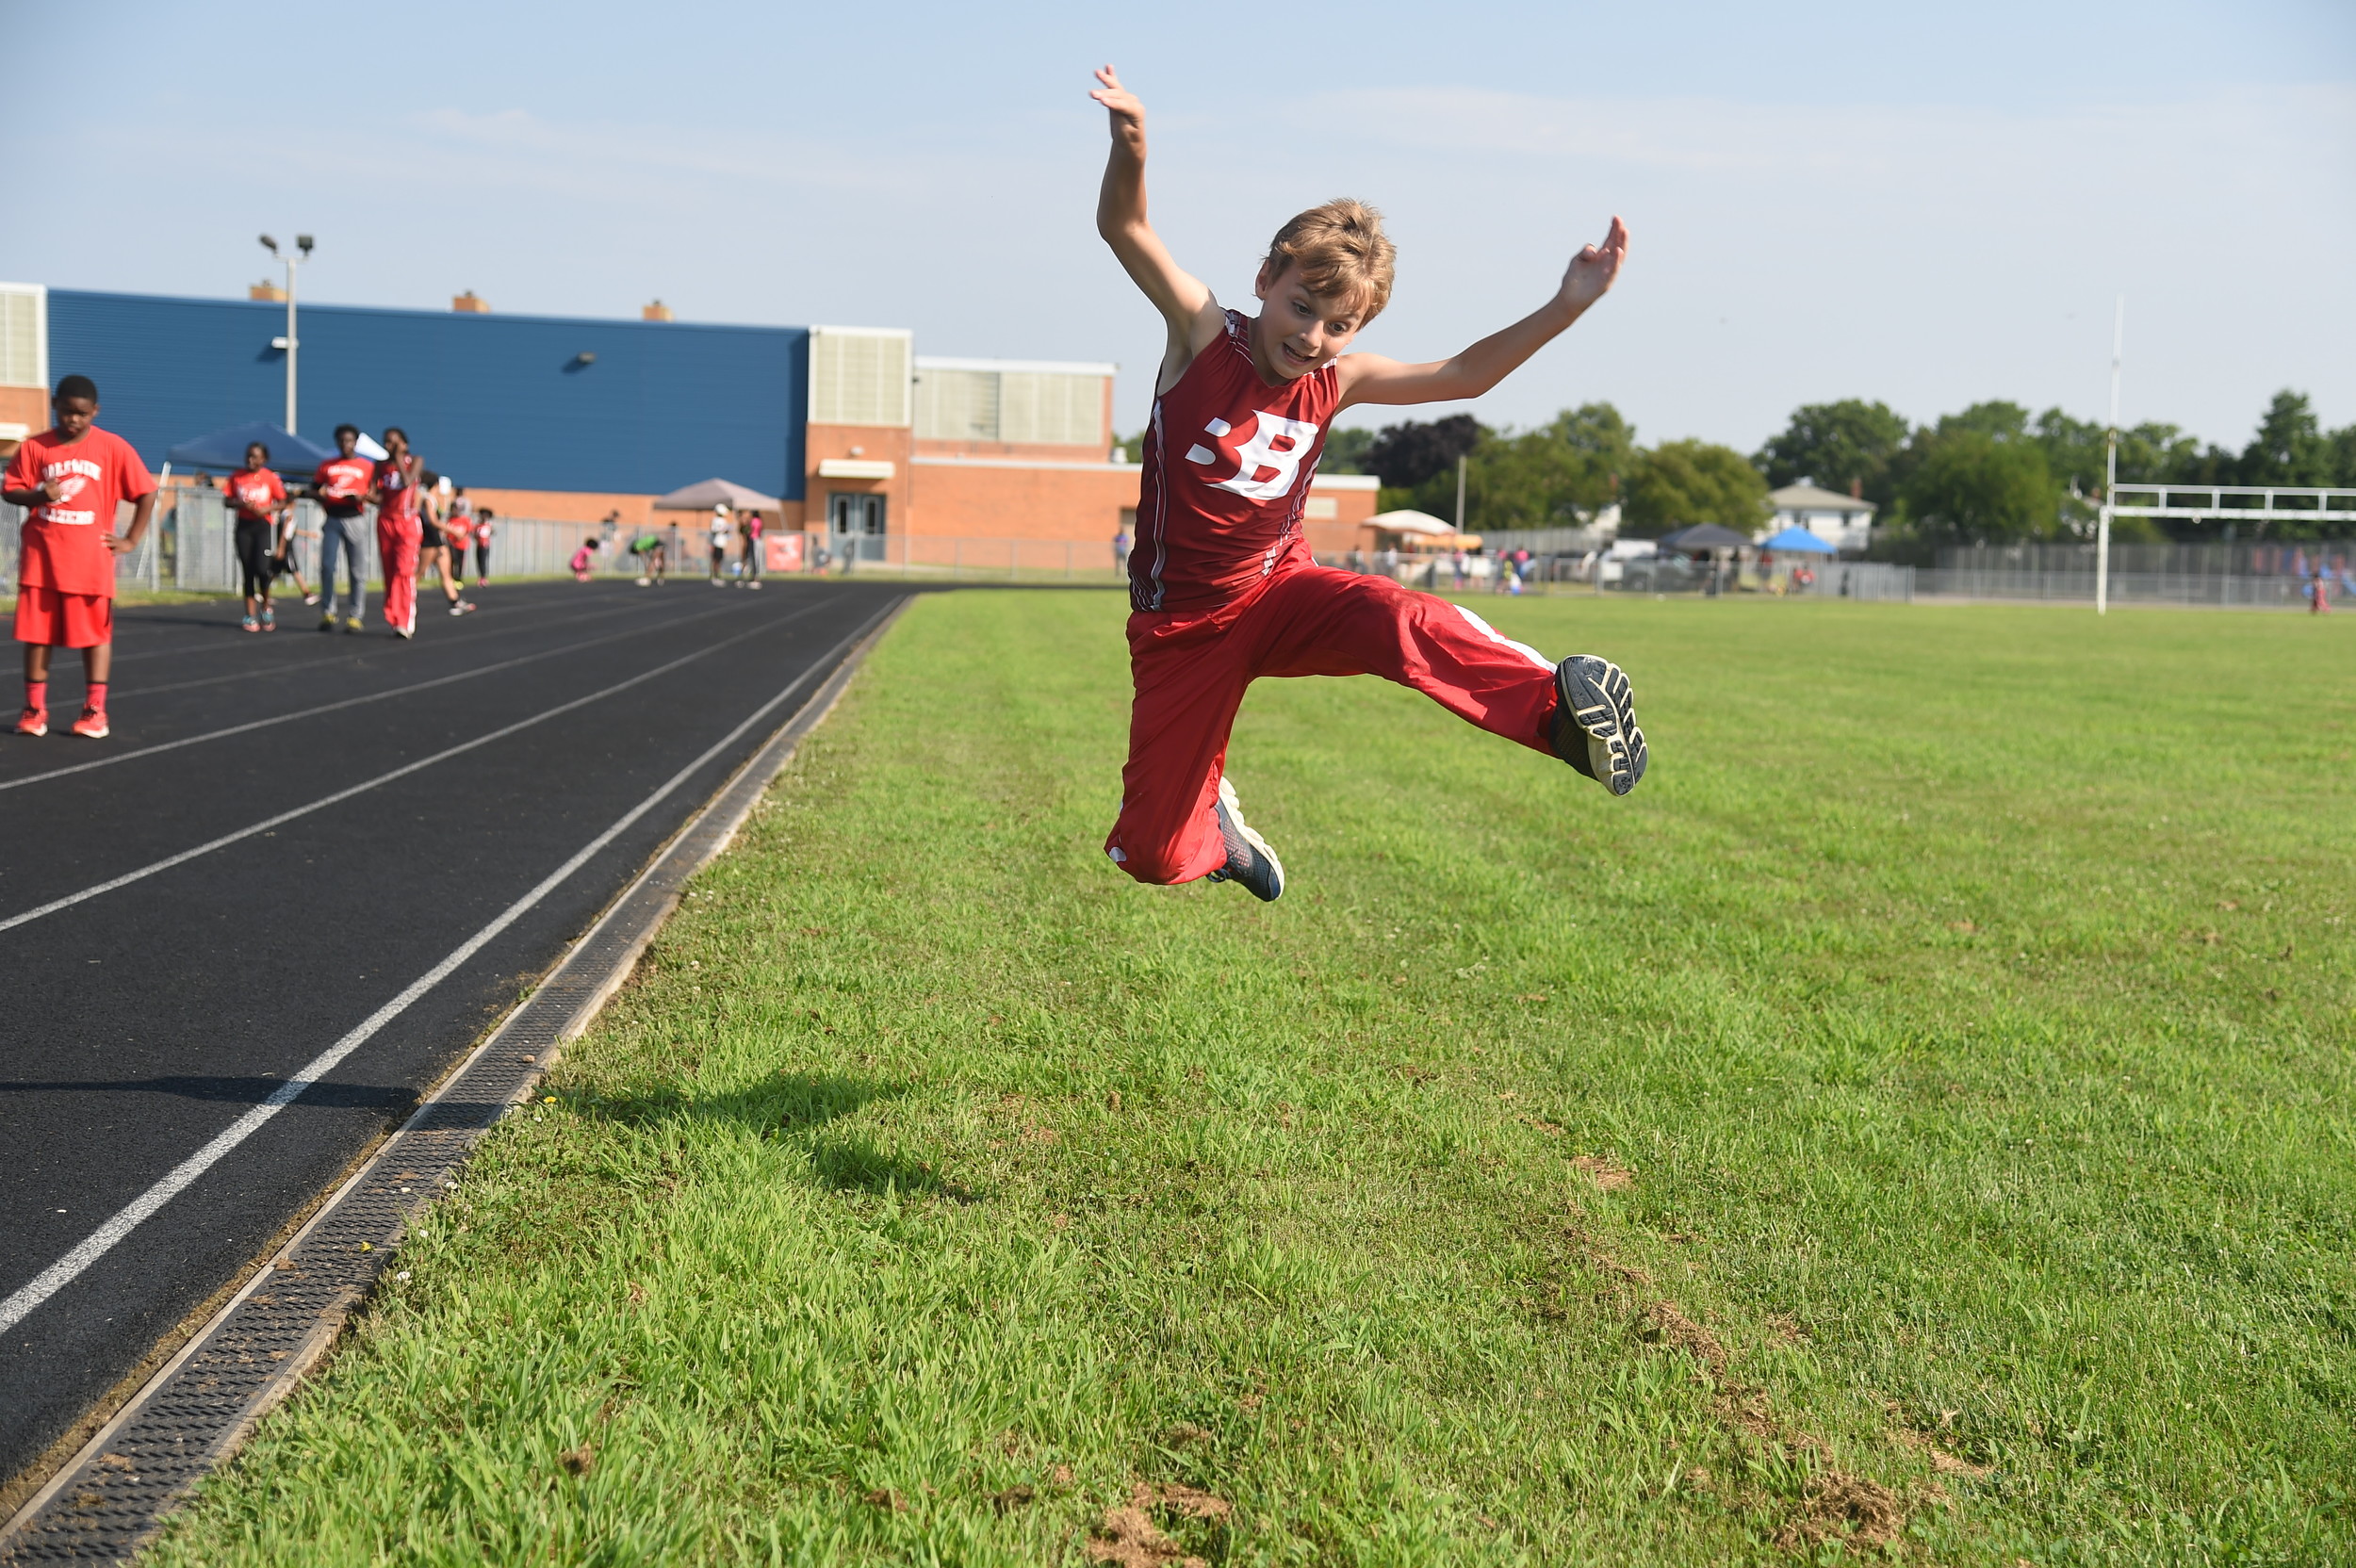 Sean O’Connor, 10, practiced for the long jump.